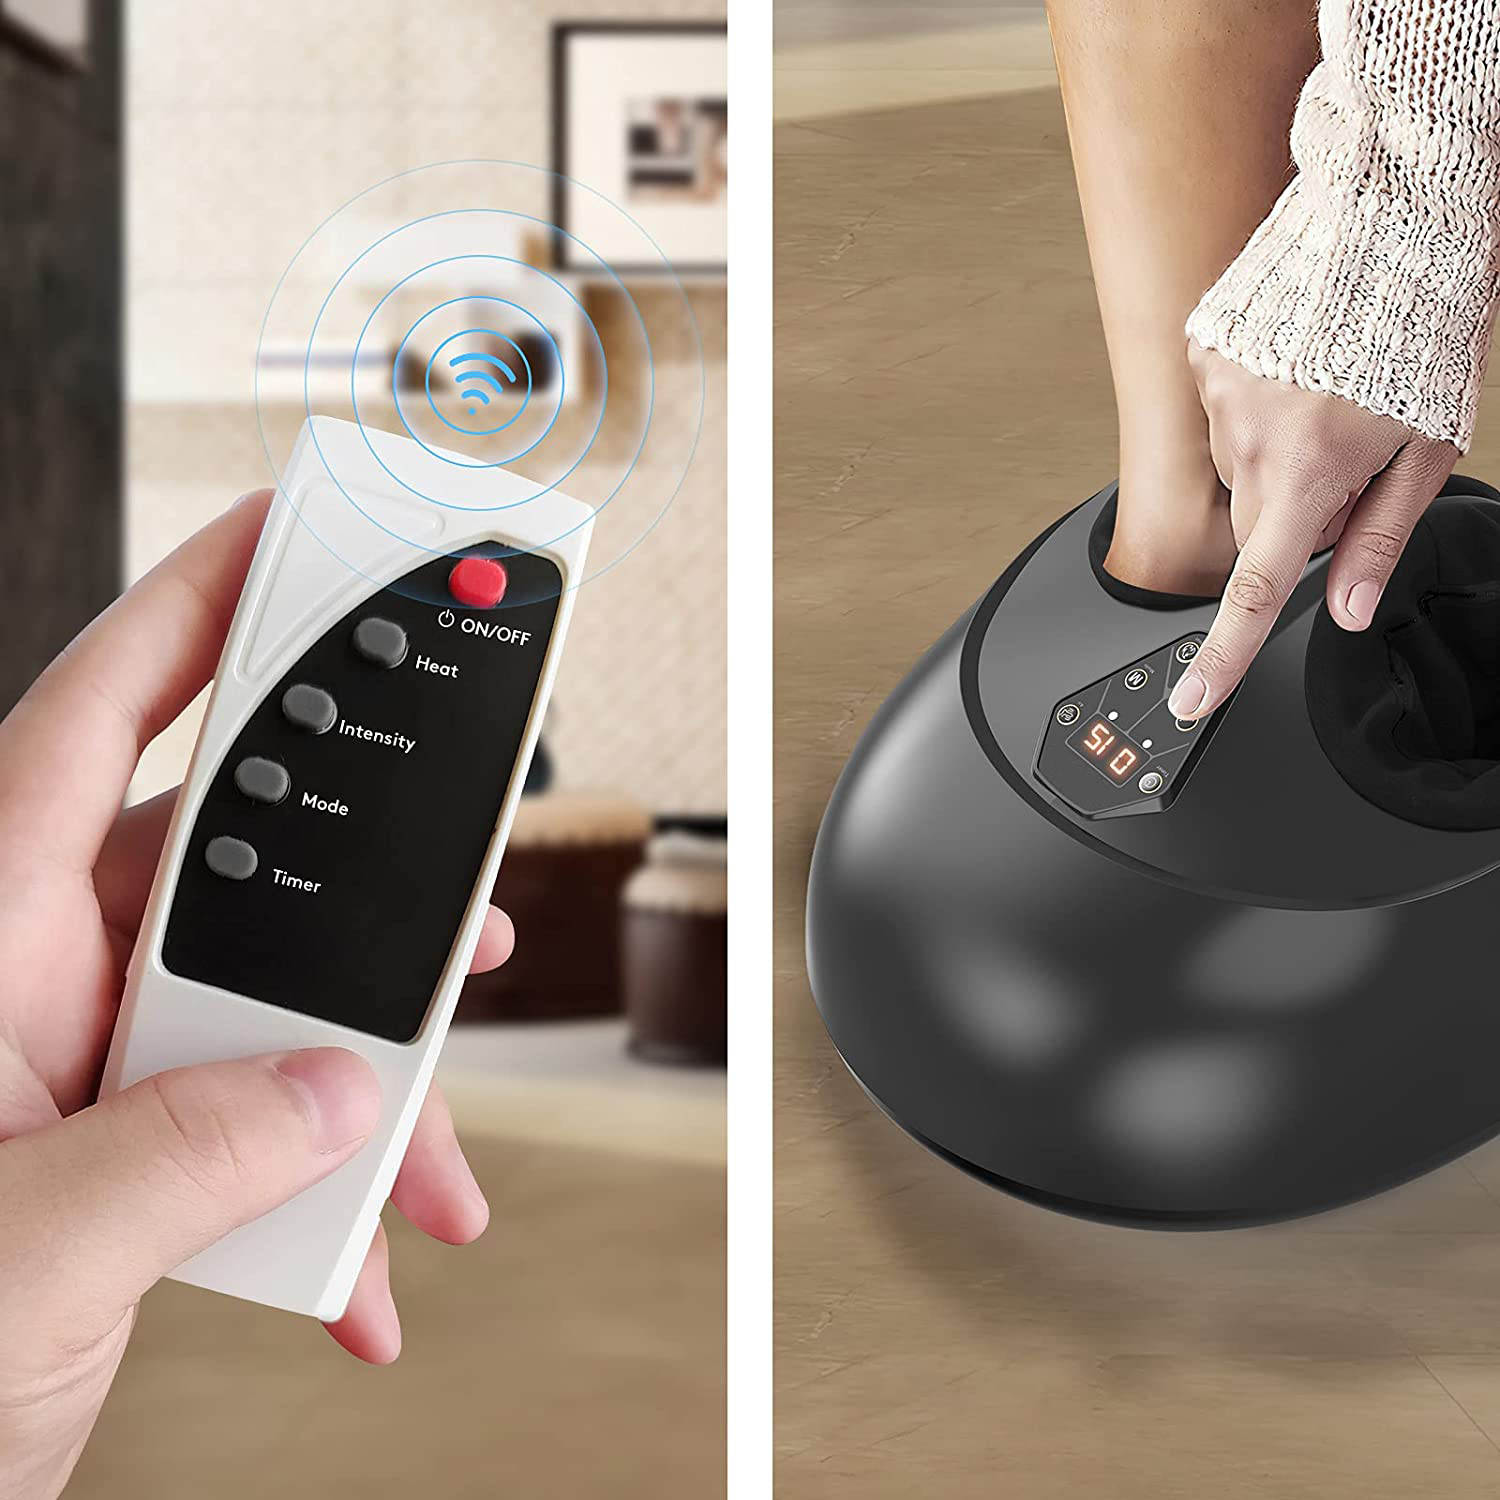 Discover the SIYACO Shiatsu Foot Massager with Heating Function and Wireless Remote